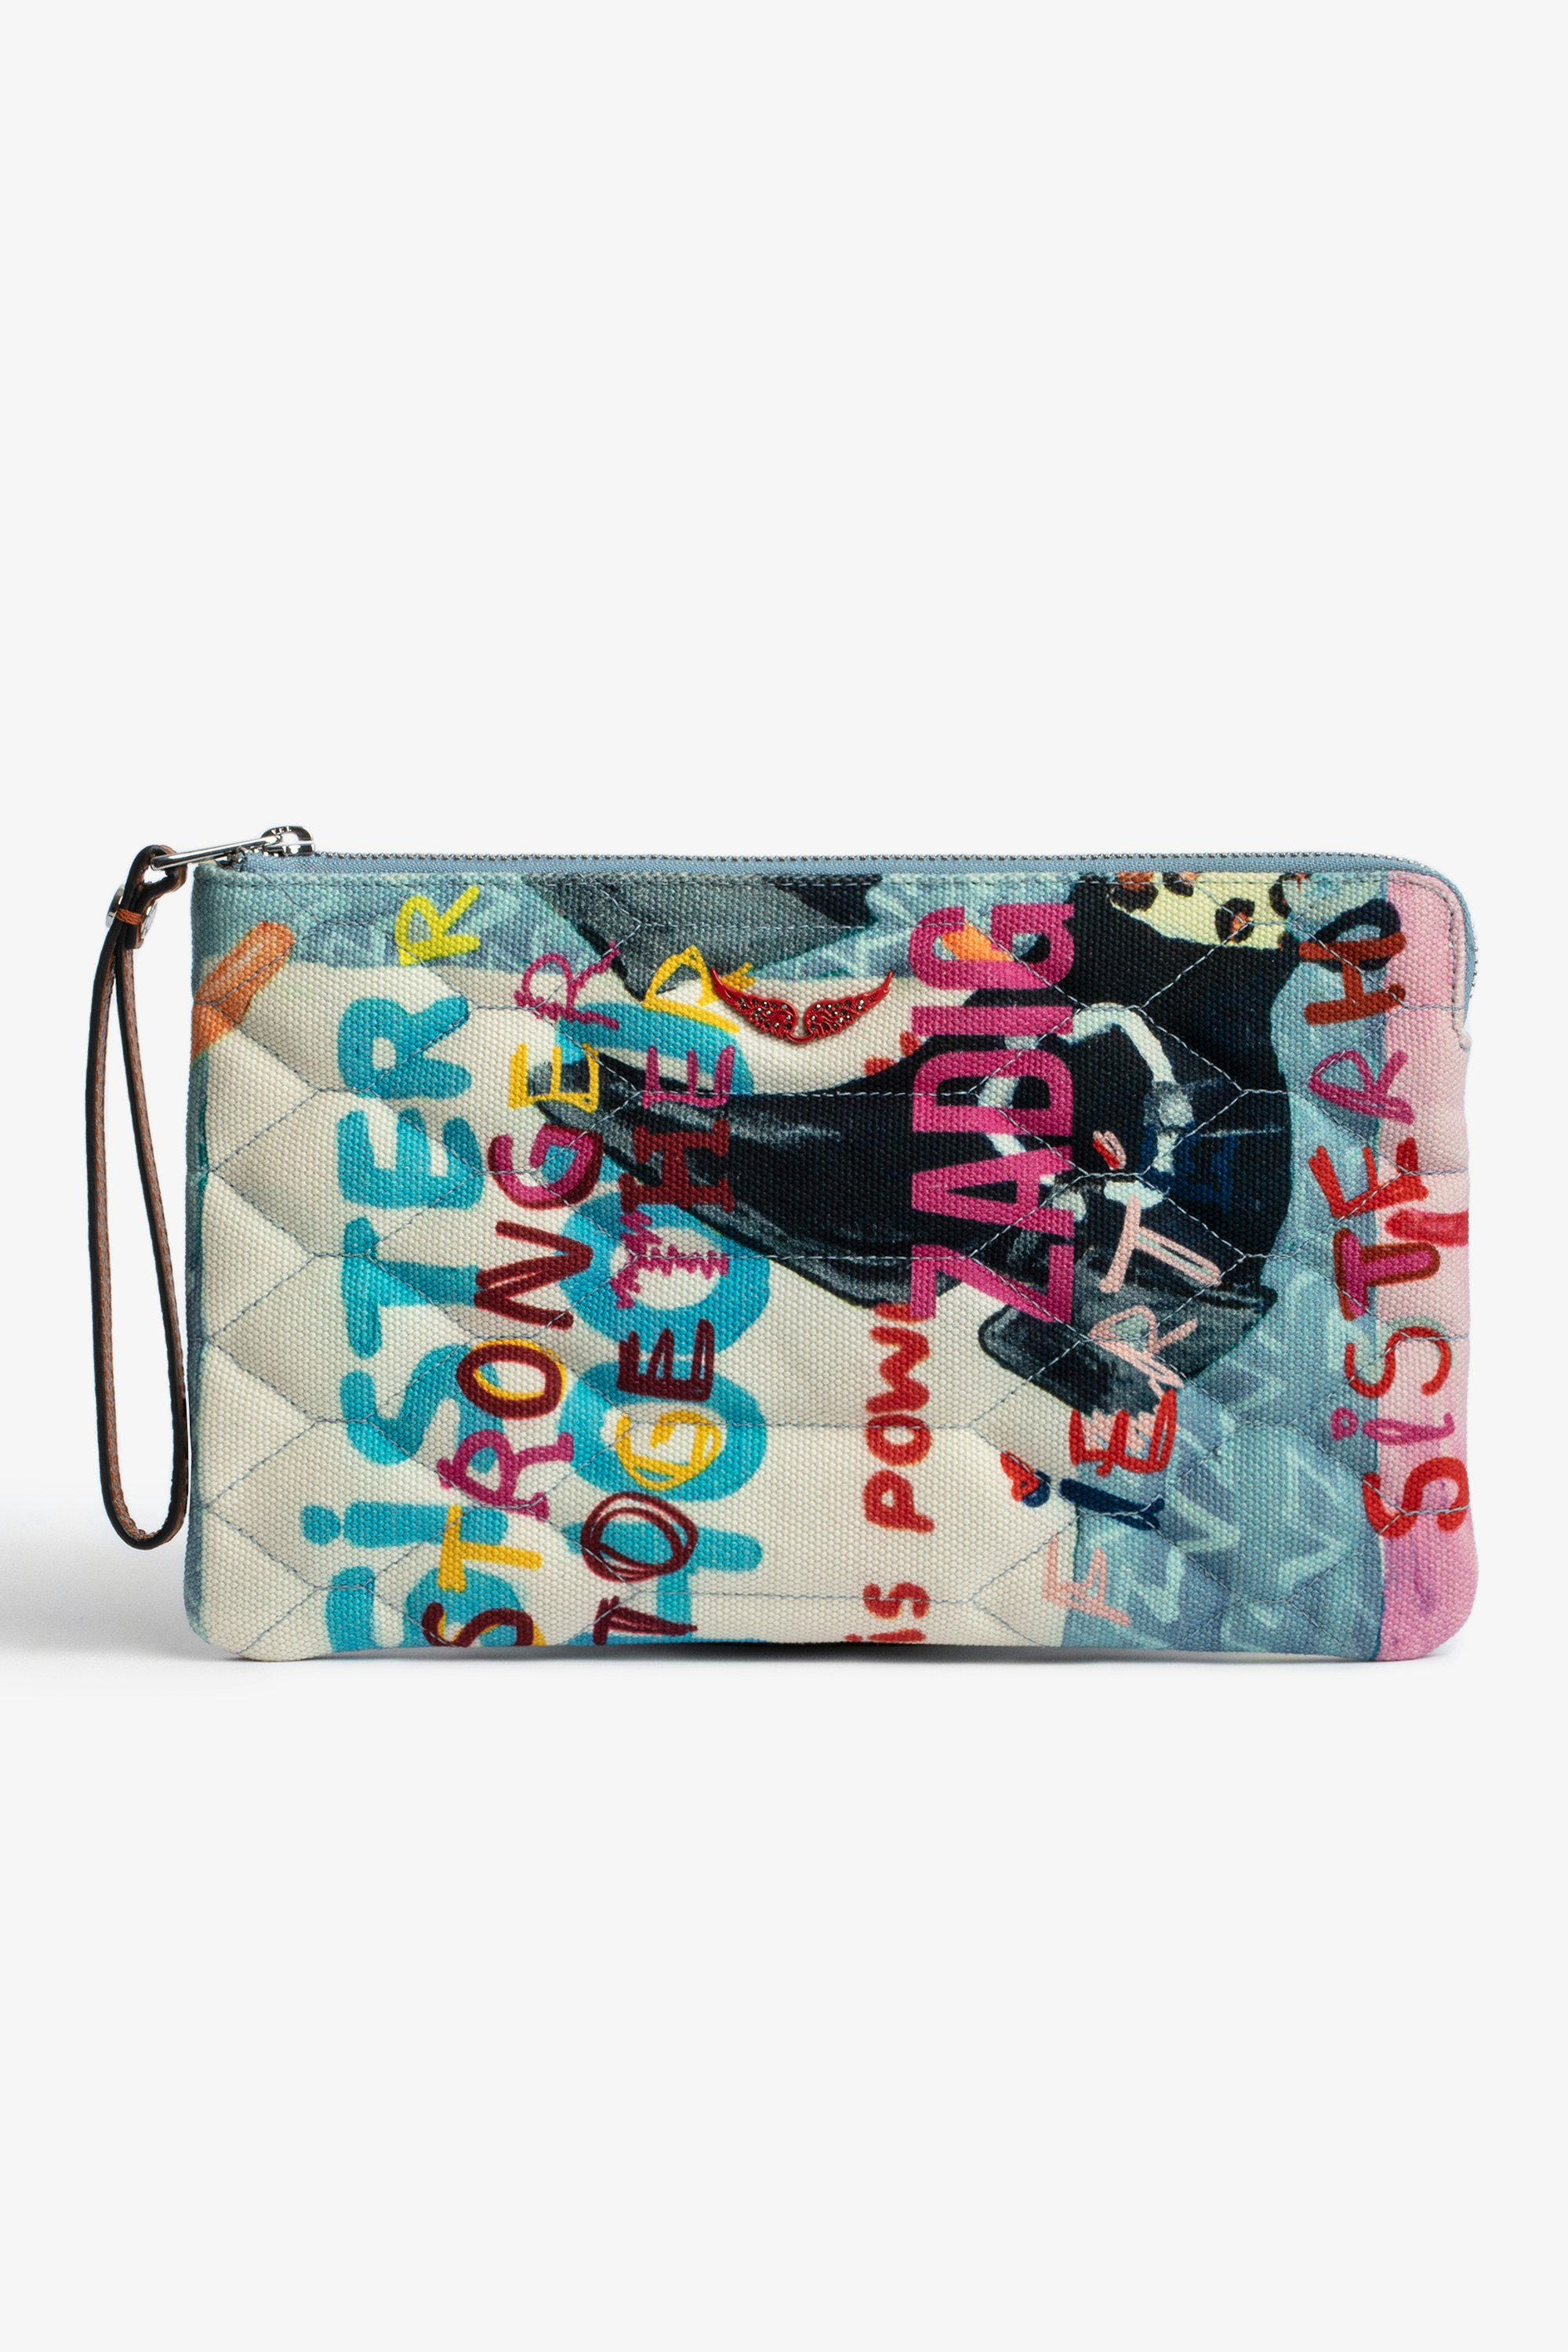 Band Of Sisters Uma クラッチバッグ Women’s Band Of Sisters print cotton quilted zipped clutch